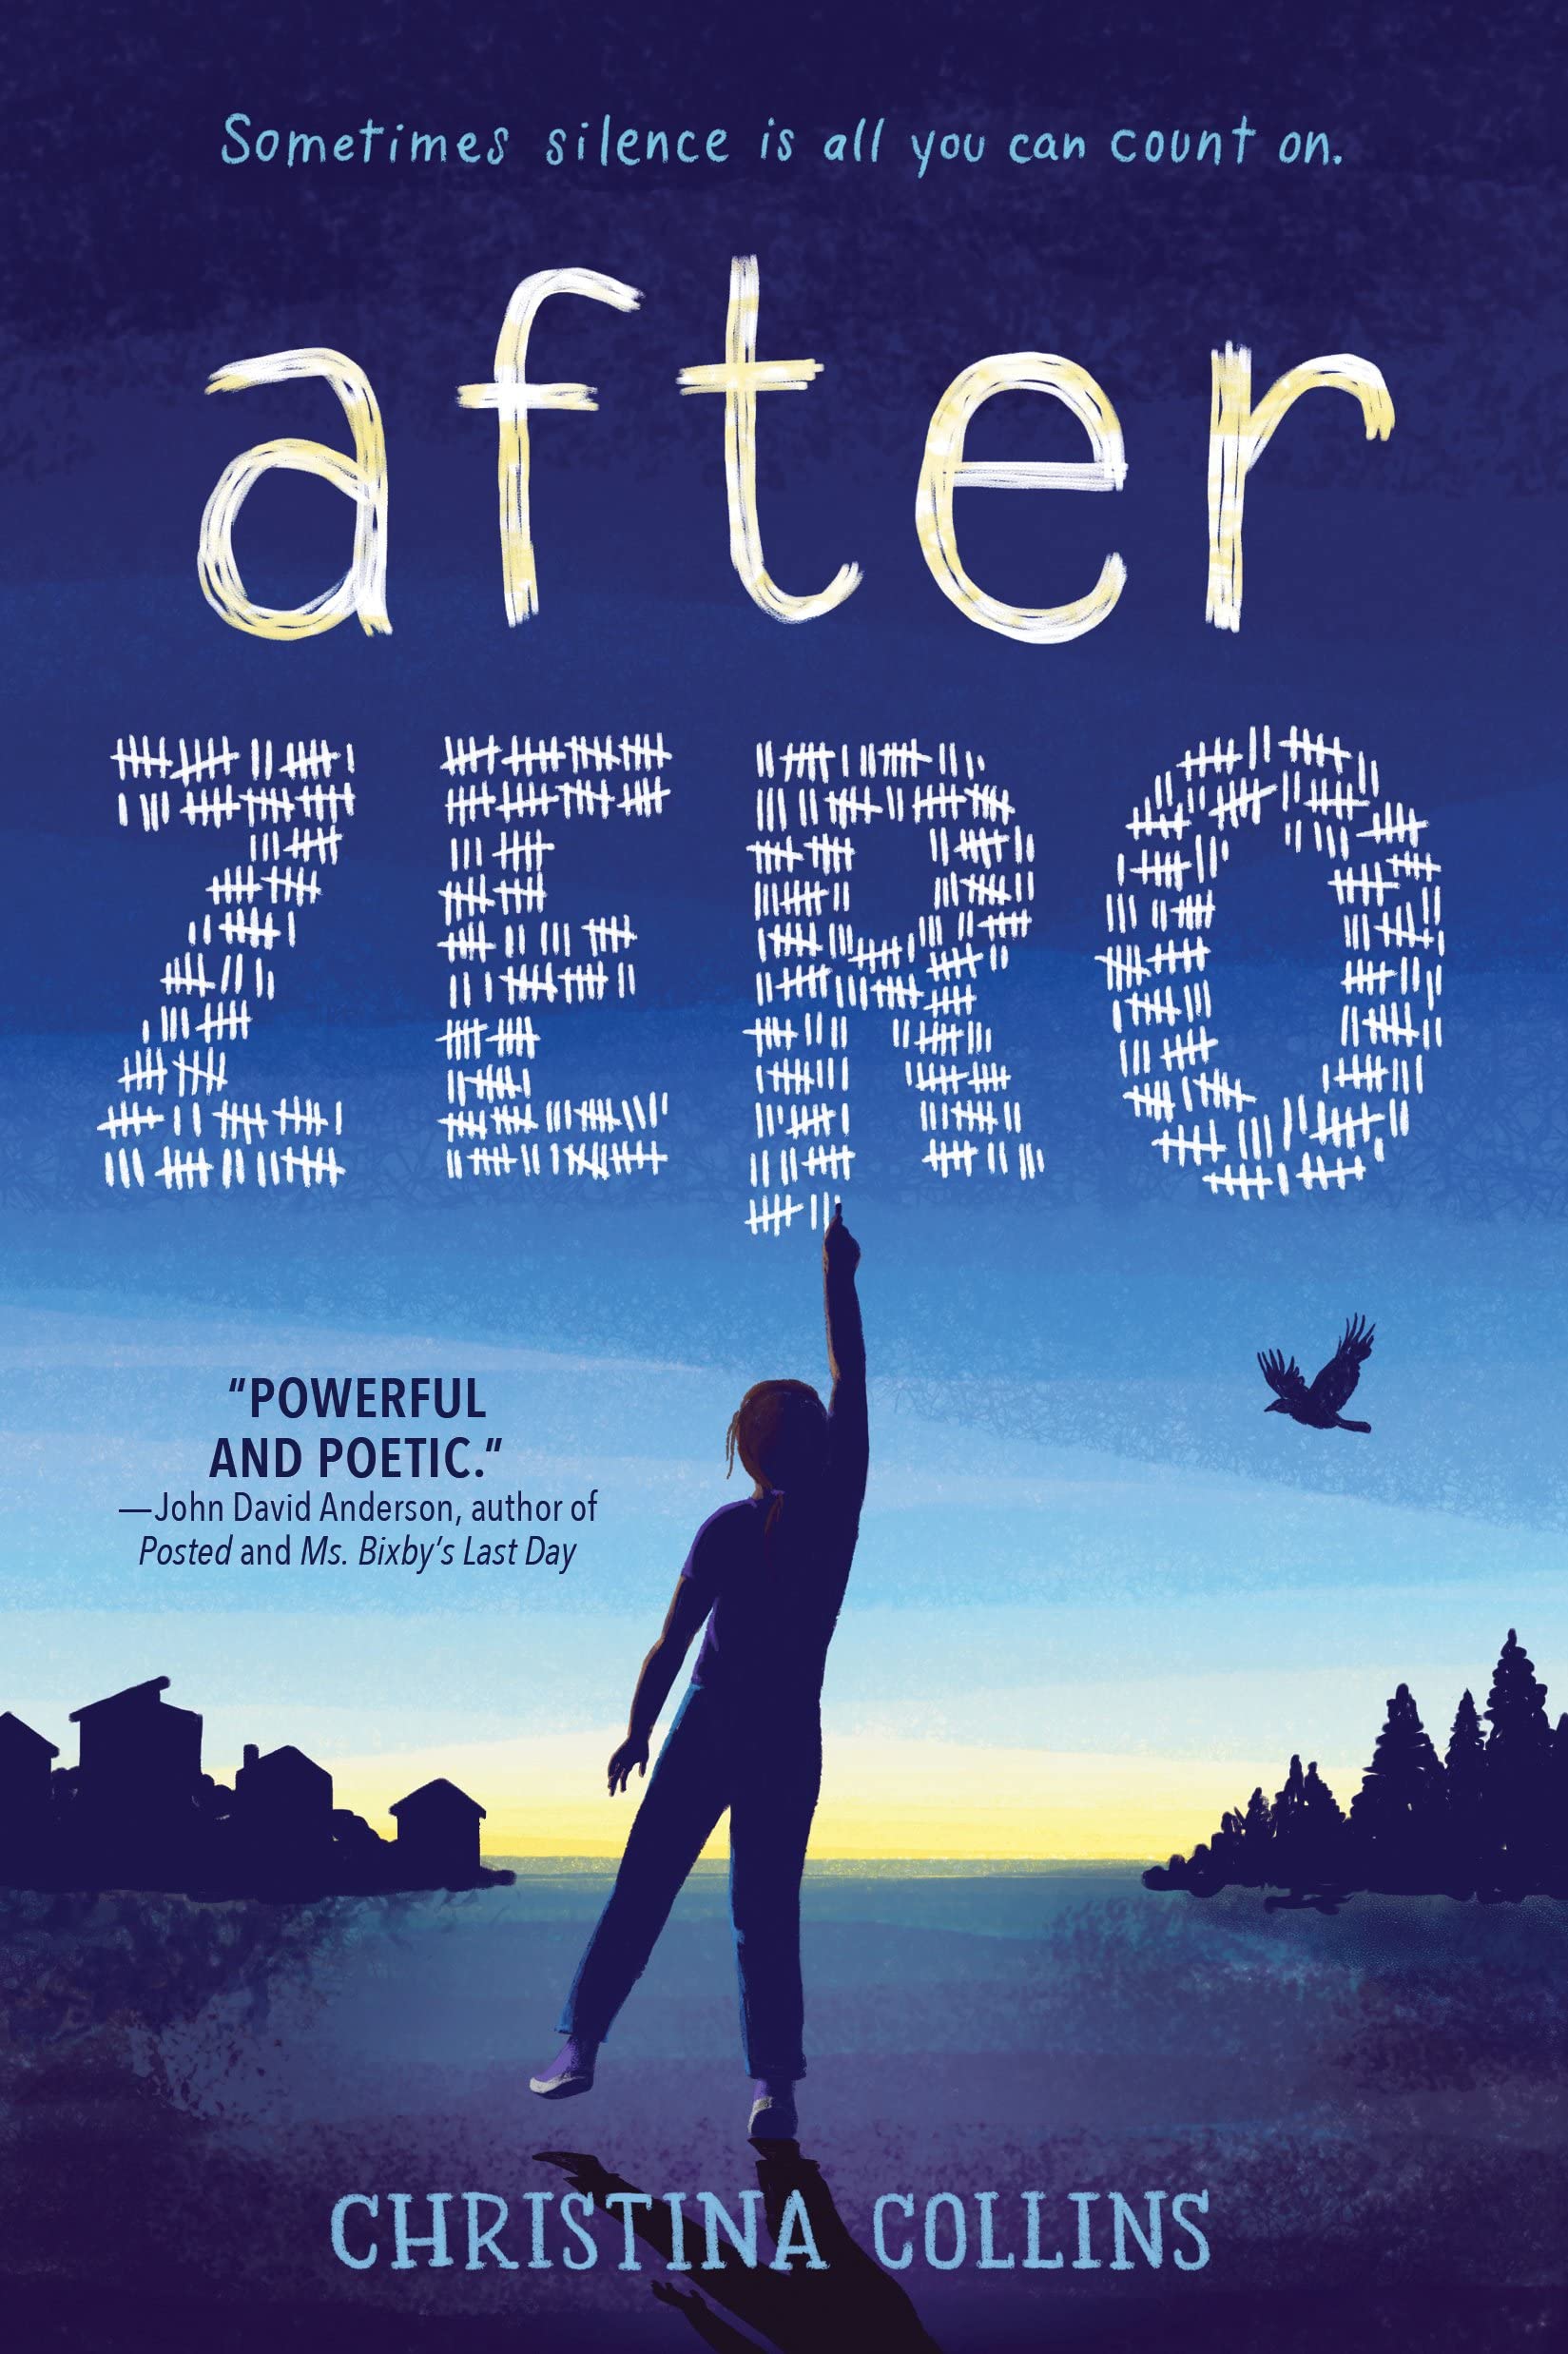 After Zero (Hardcover) by Christina Collins